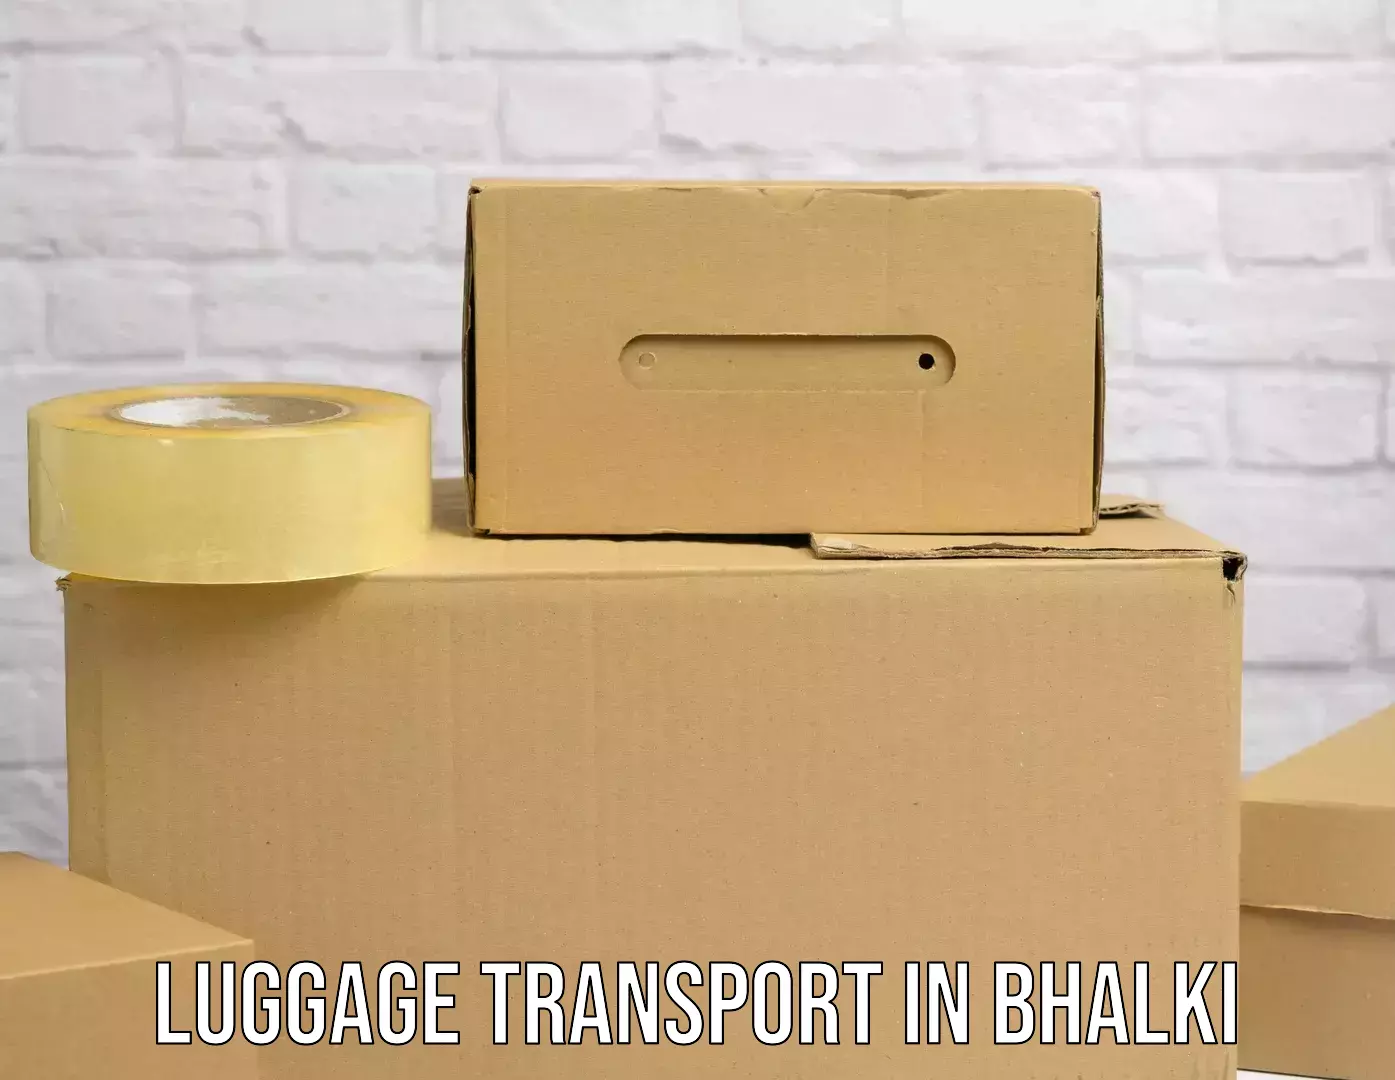 Luggage shipping planner in Bhalki